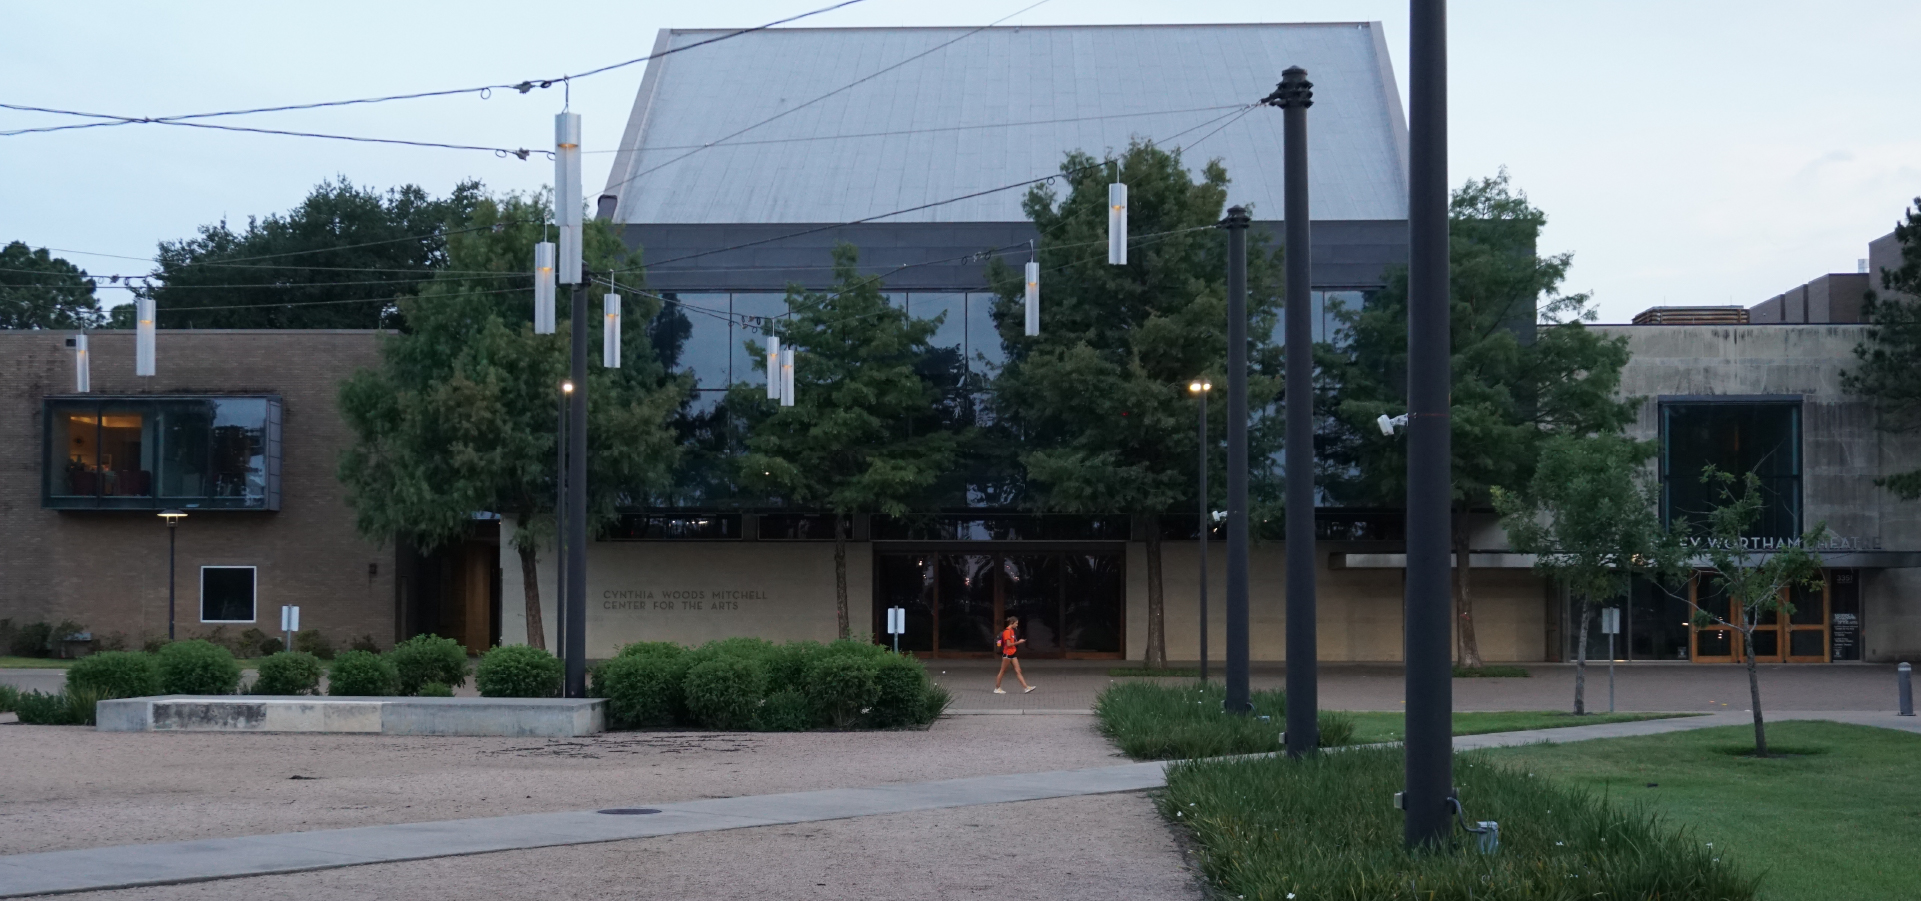 In the foreground, a grass and gravel courtyard with strung lighting design above; in the background a person wearing red walking by the Mitchell Center building during late afternoon.